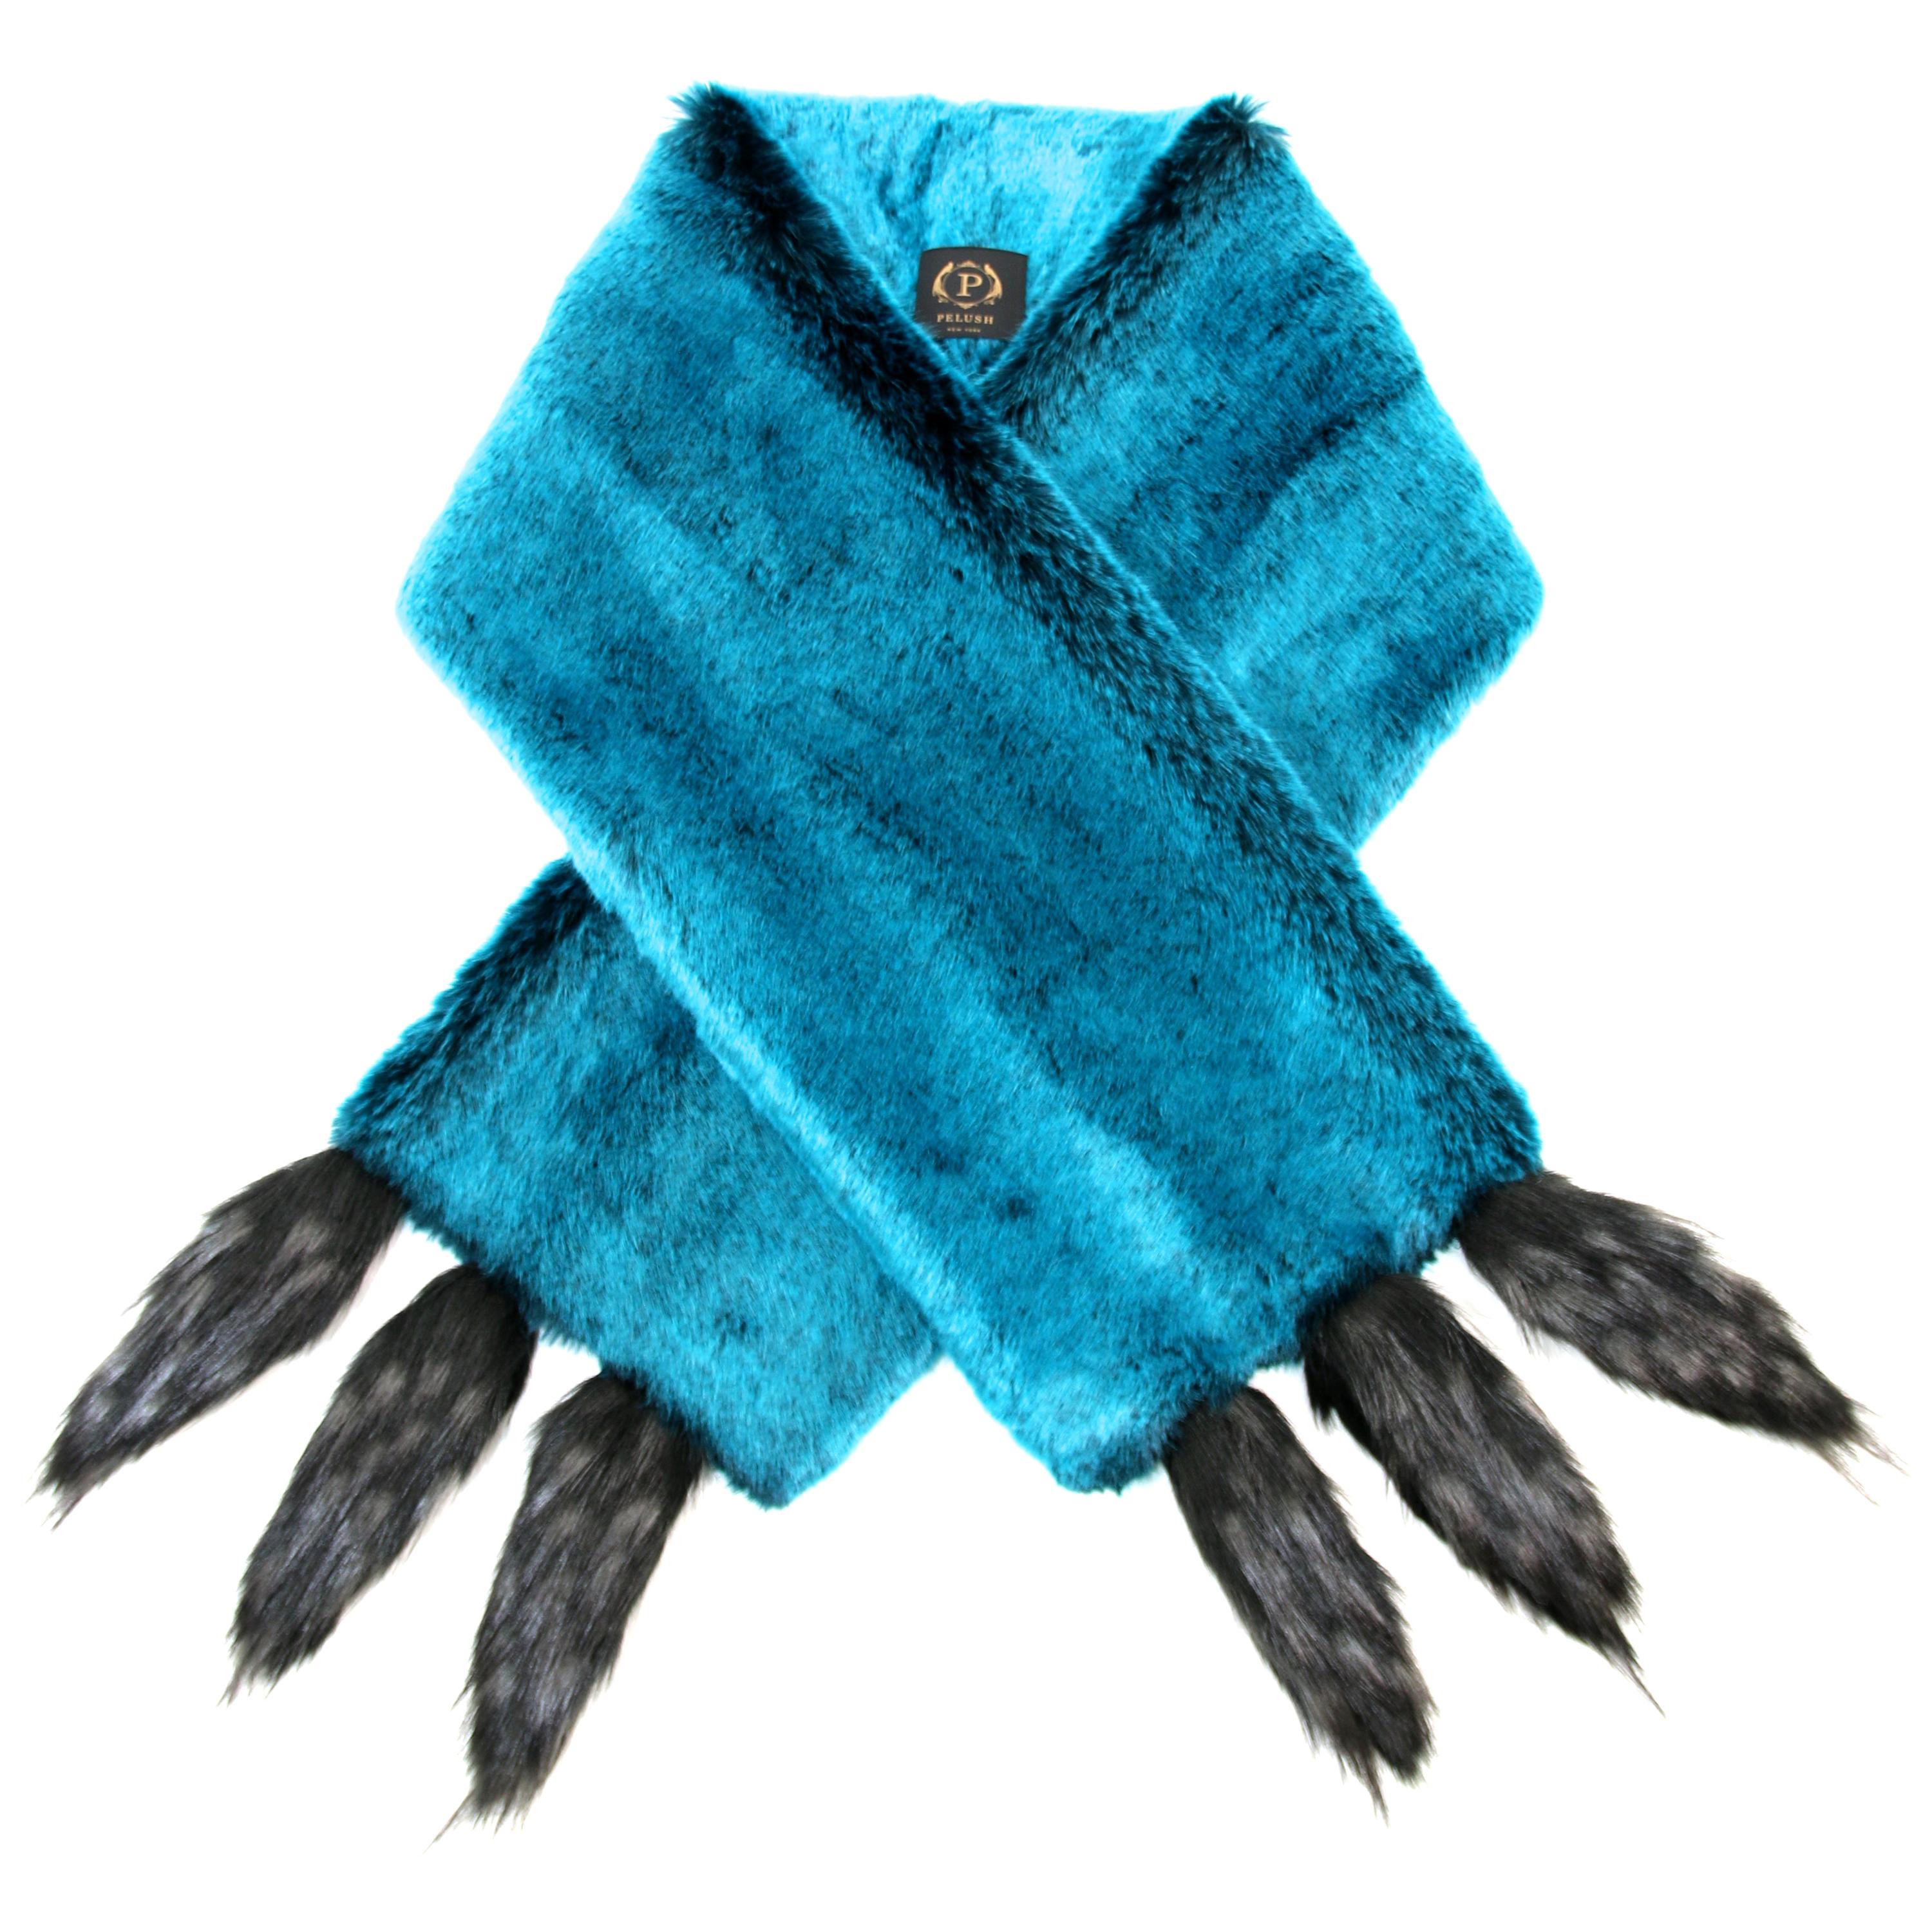 Pelush Teal Faux Fur Chinchilla Stole With Faux Fox Fringes - One Size